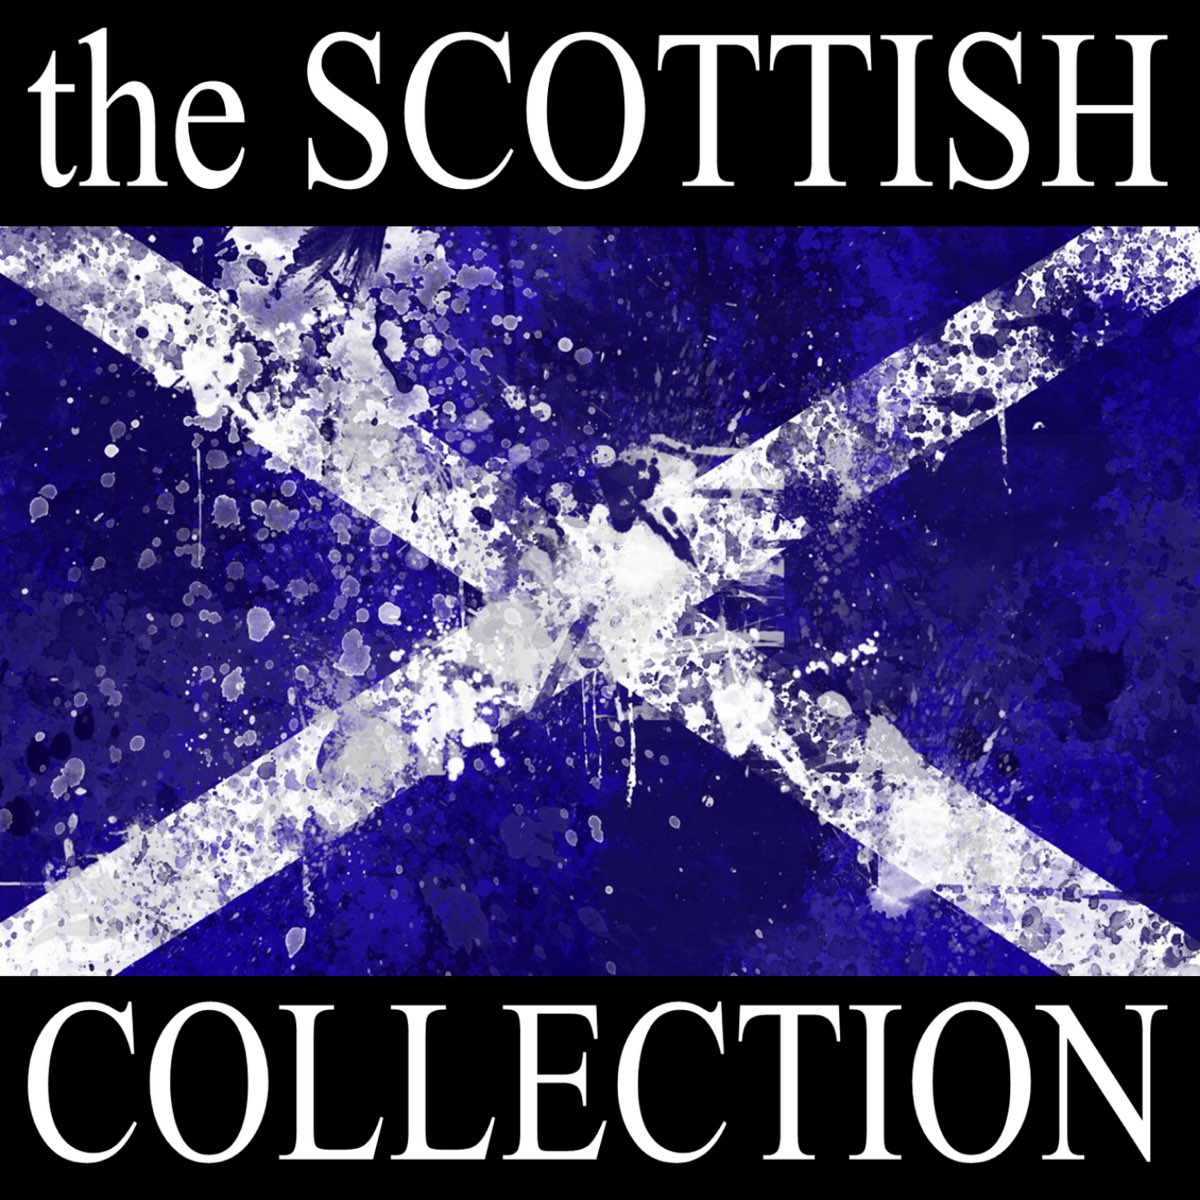 The Scottish collection.